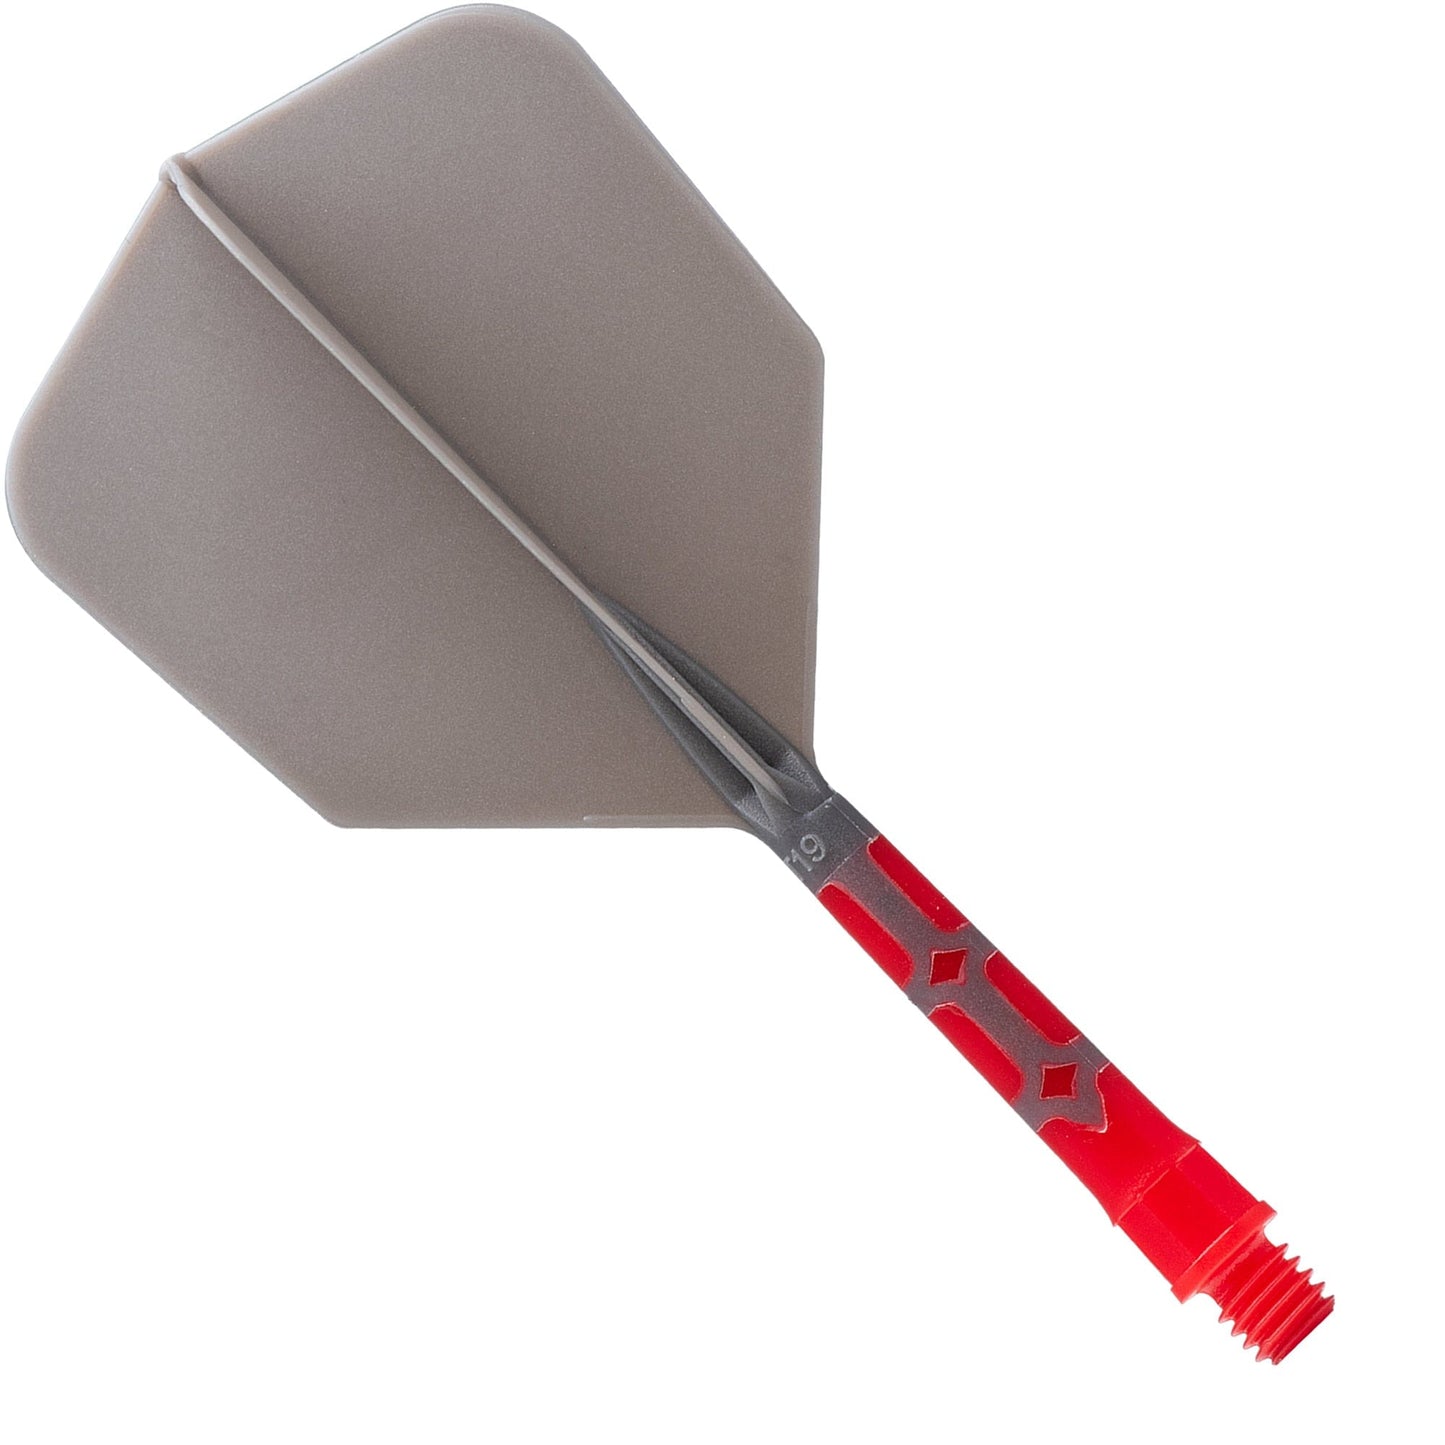 Cuesoul Rost T19 Integrated Dart Shaft and Flights - Big Wing - Red with Grey Flight